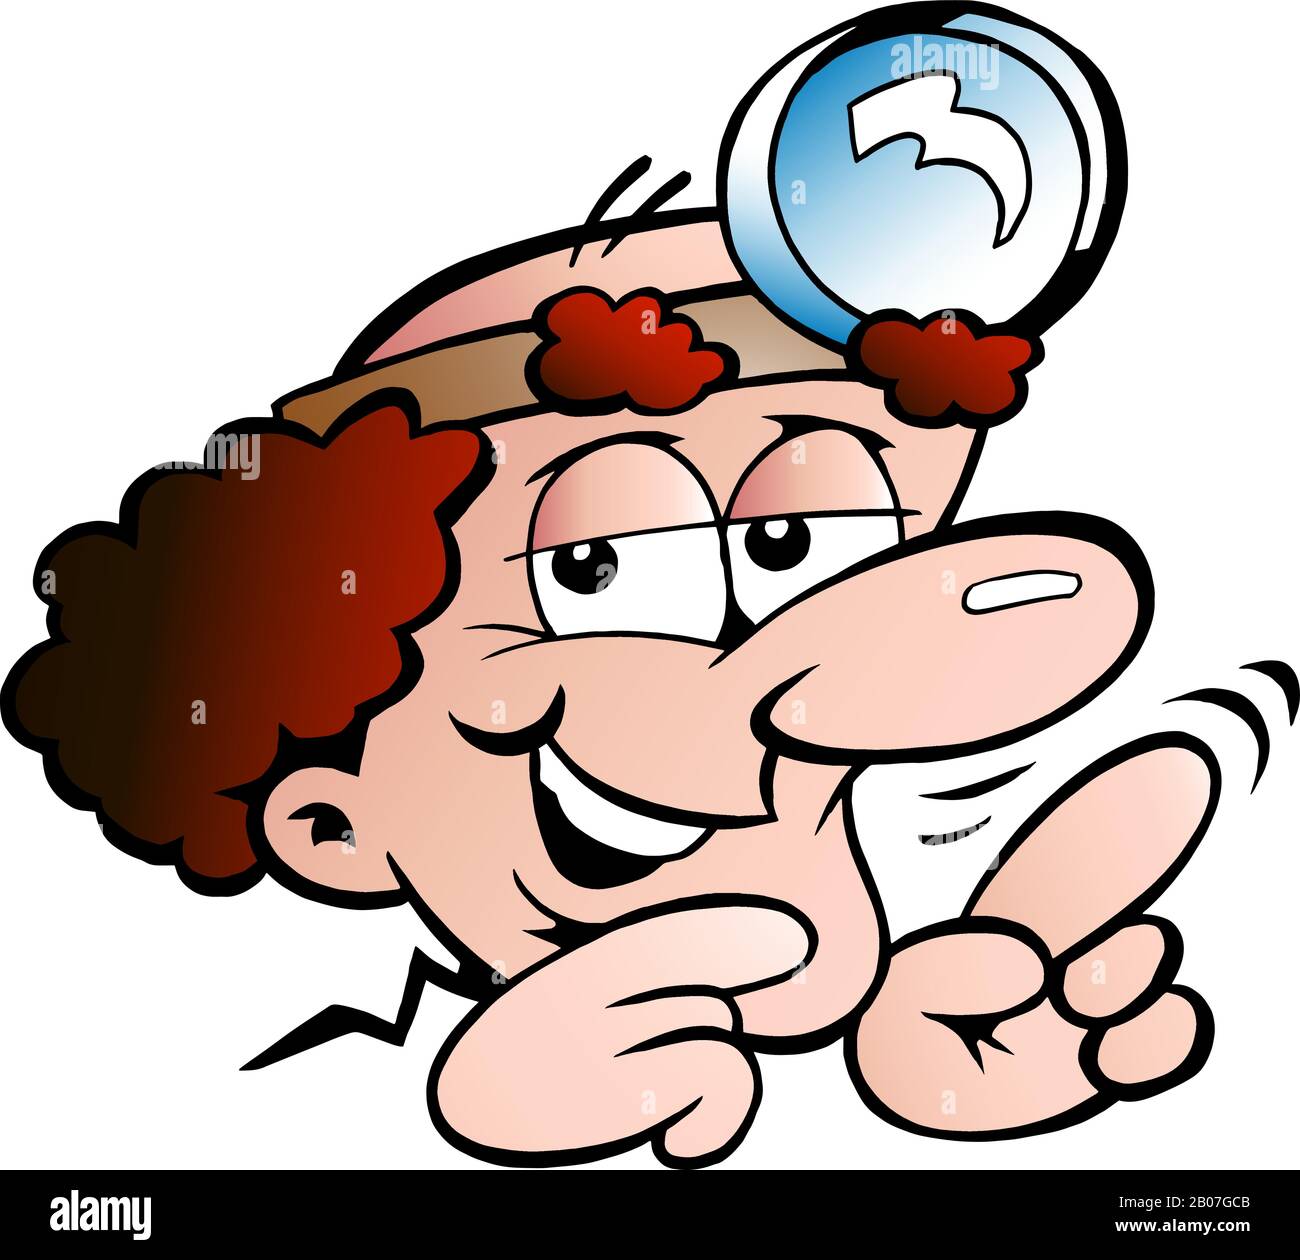 Vector Cartoon illustration of a Clever Professor or Doctor Stock Vector